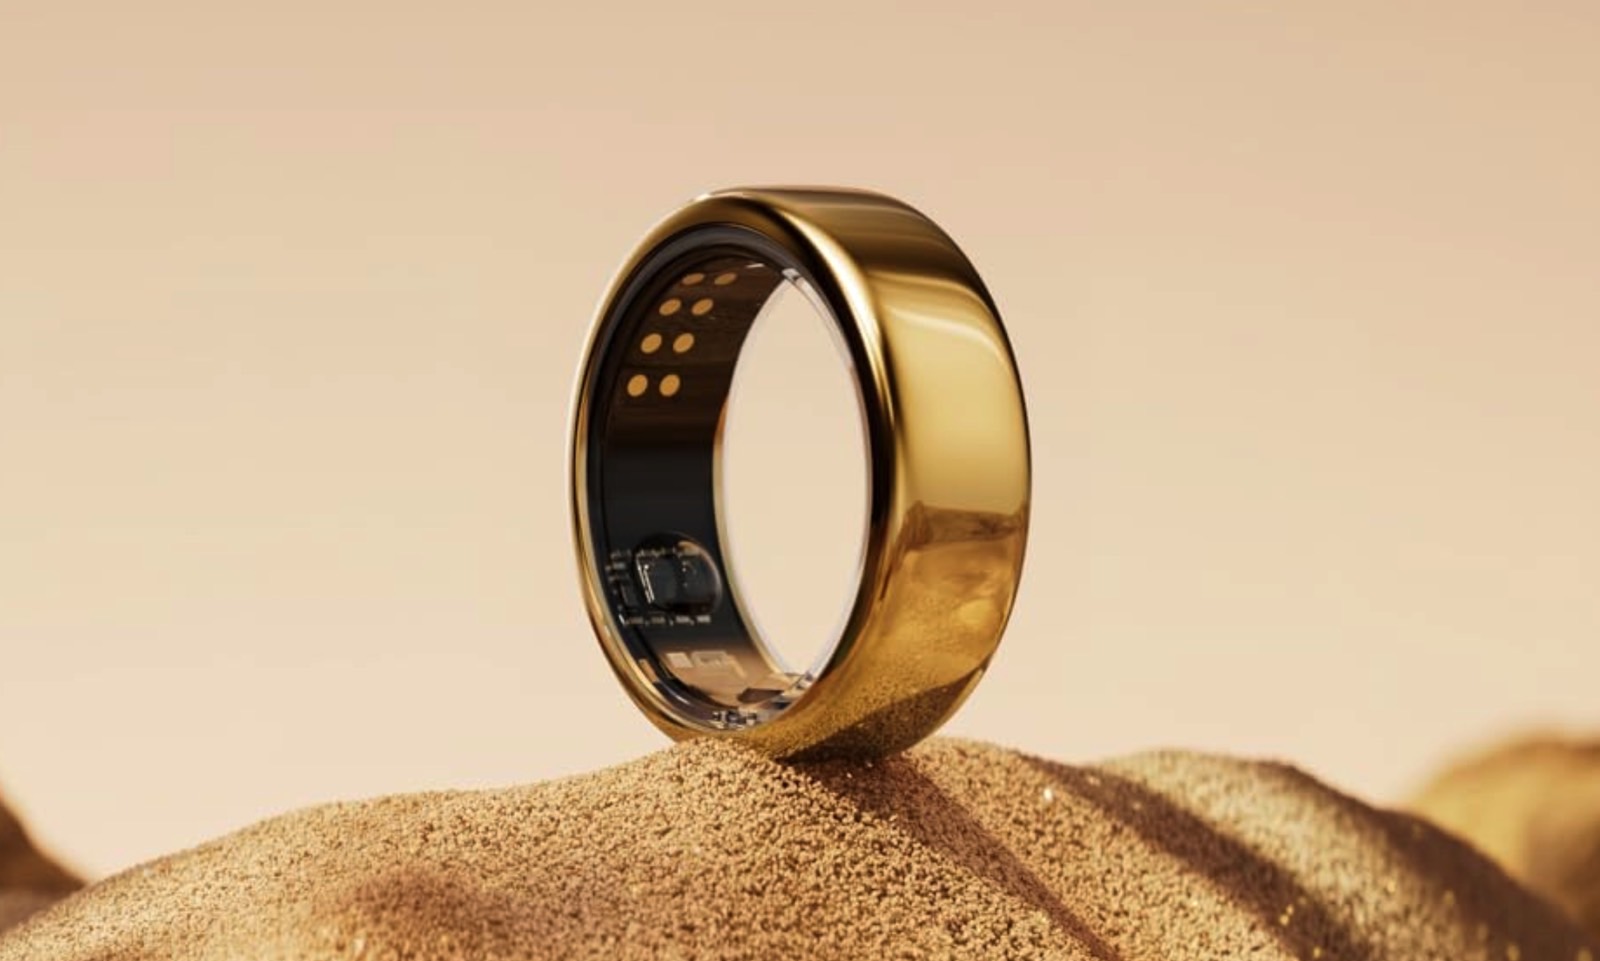 Oura Ring 3: Horizon design with gold finish.